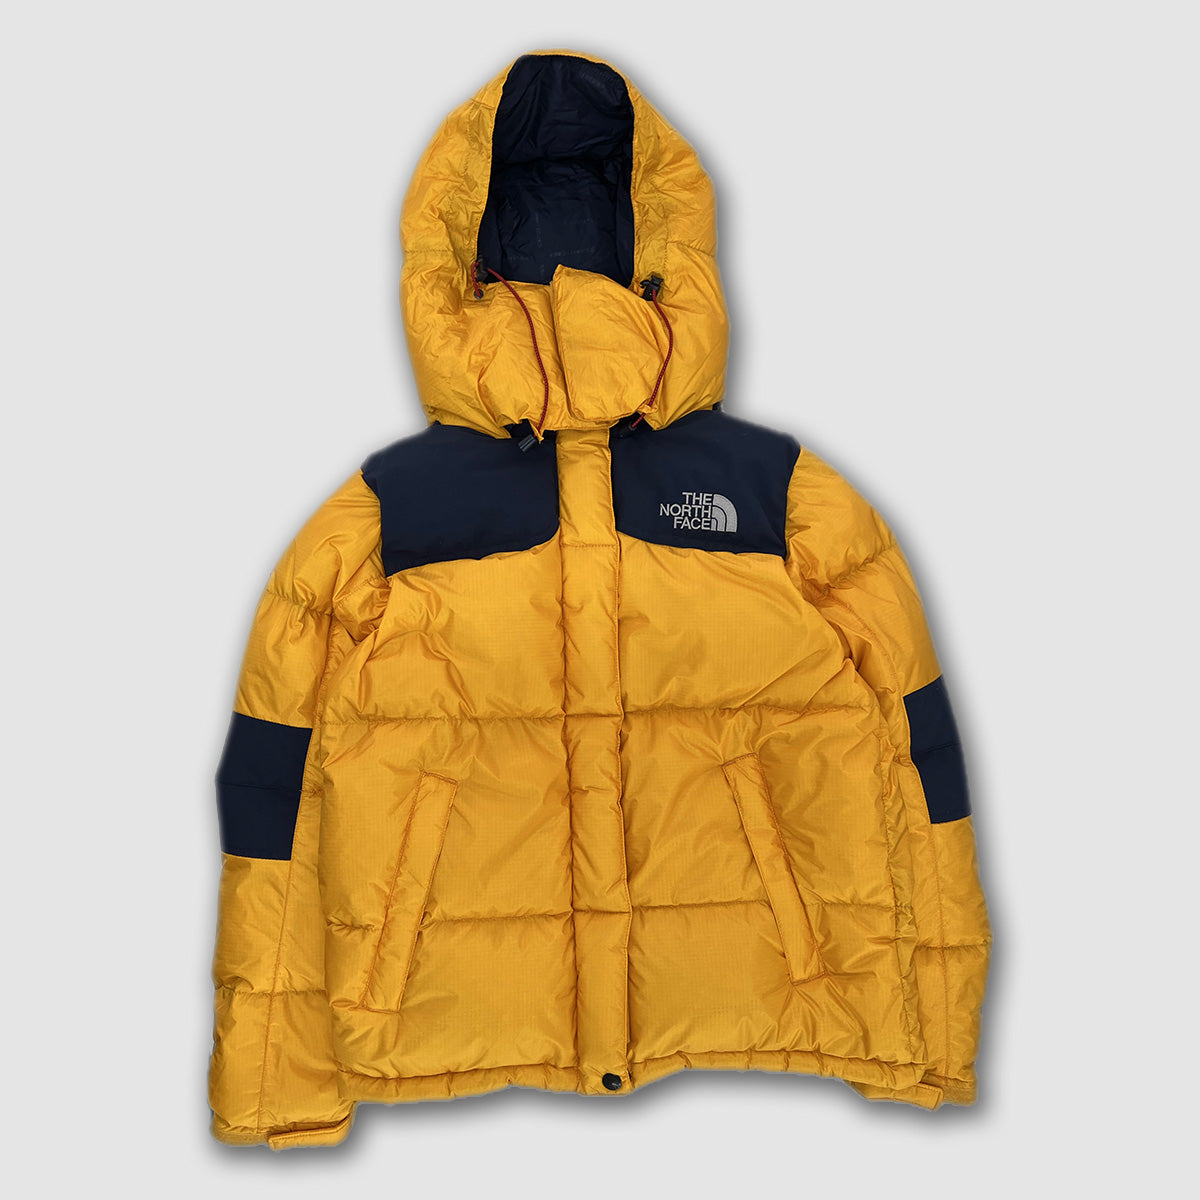 10047【THE NORTH FACE】ザノースフェイス SUMMIT SERIES 700 WIND STOPPER 90S バルトロ イエロー 85